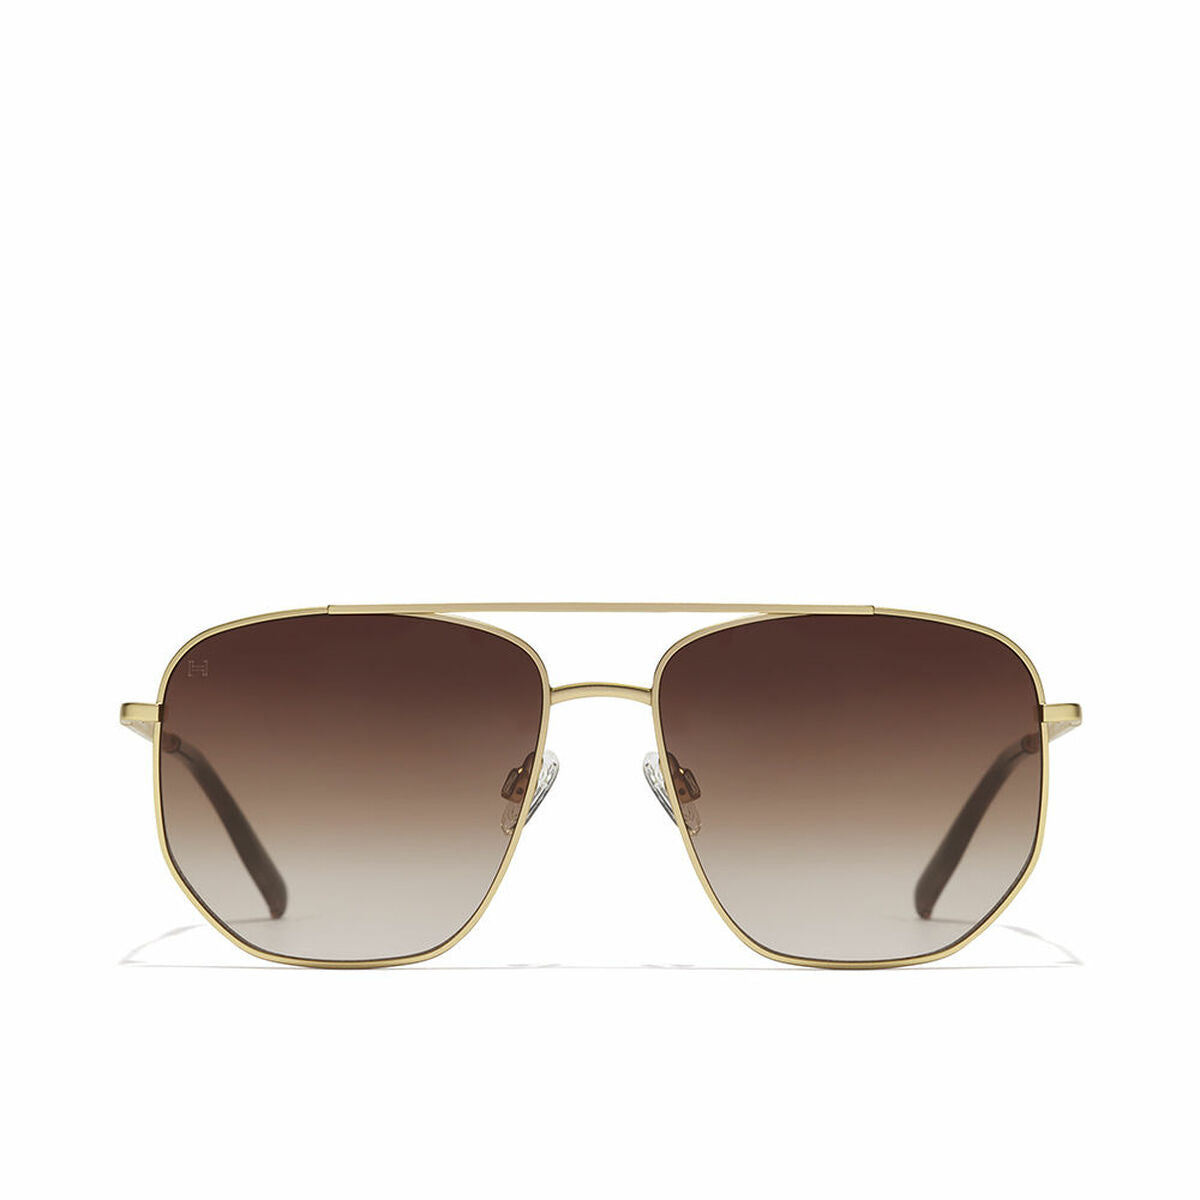 Unisex Sunglasses Hawkers Cad Ø 53 mm Golden Brown